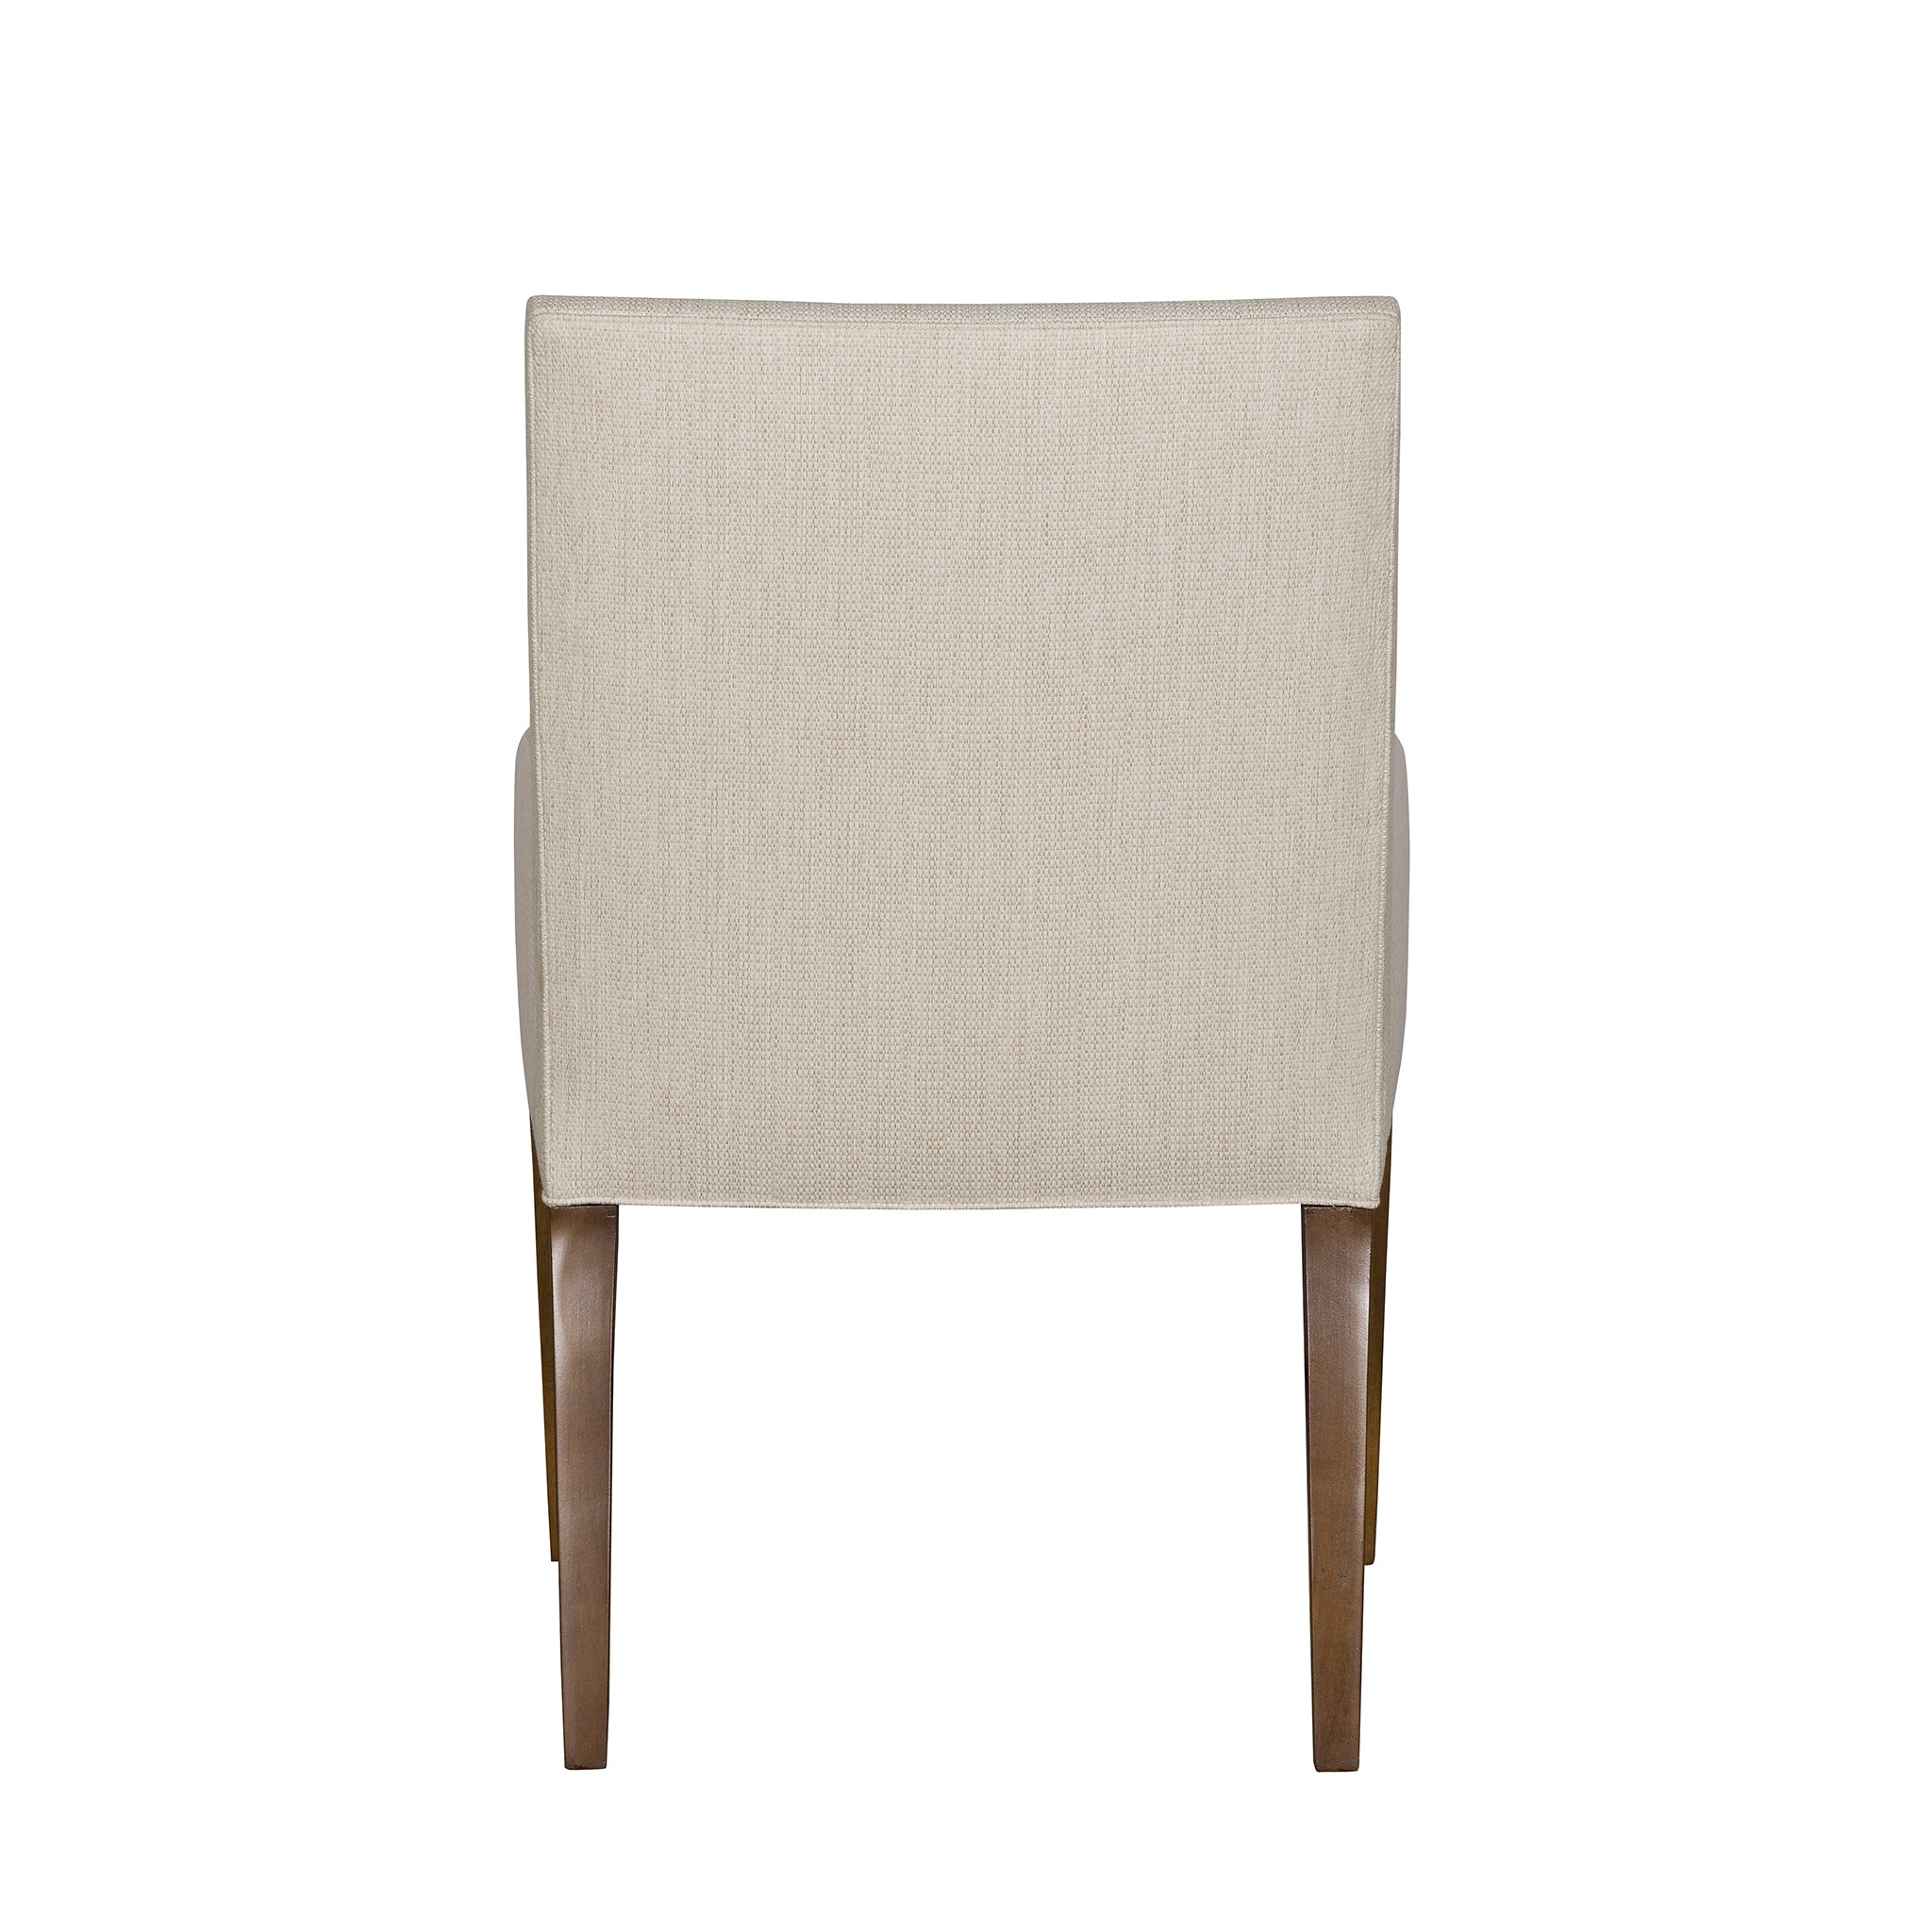 vanguard dune ii stocked performance dining chair dining chairs 